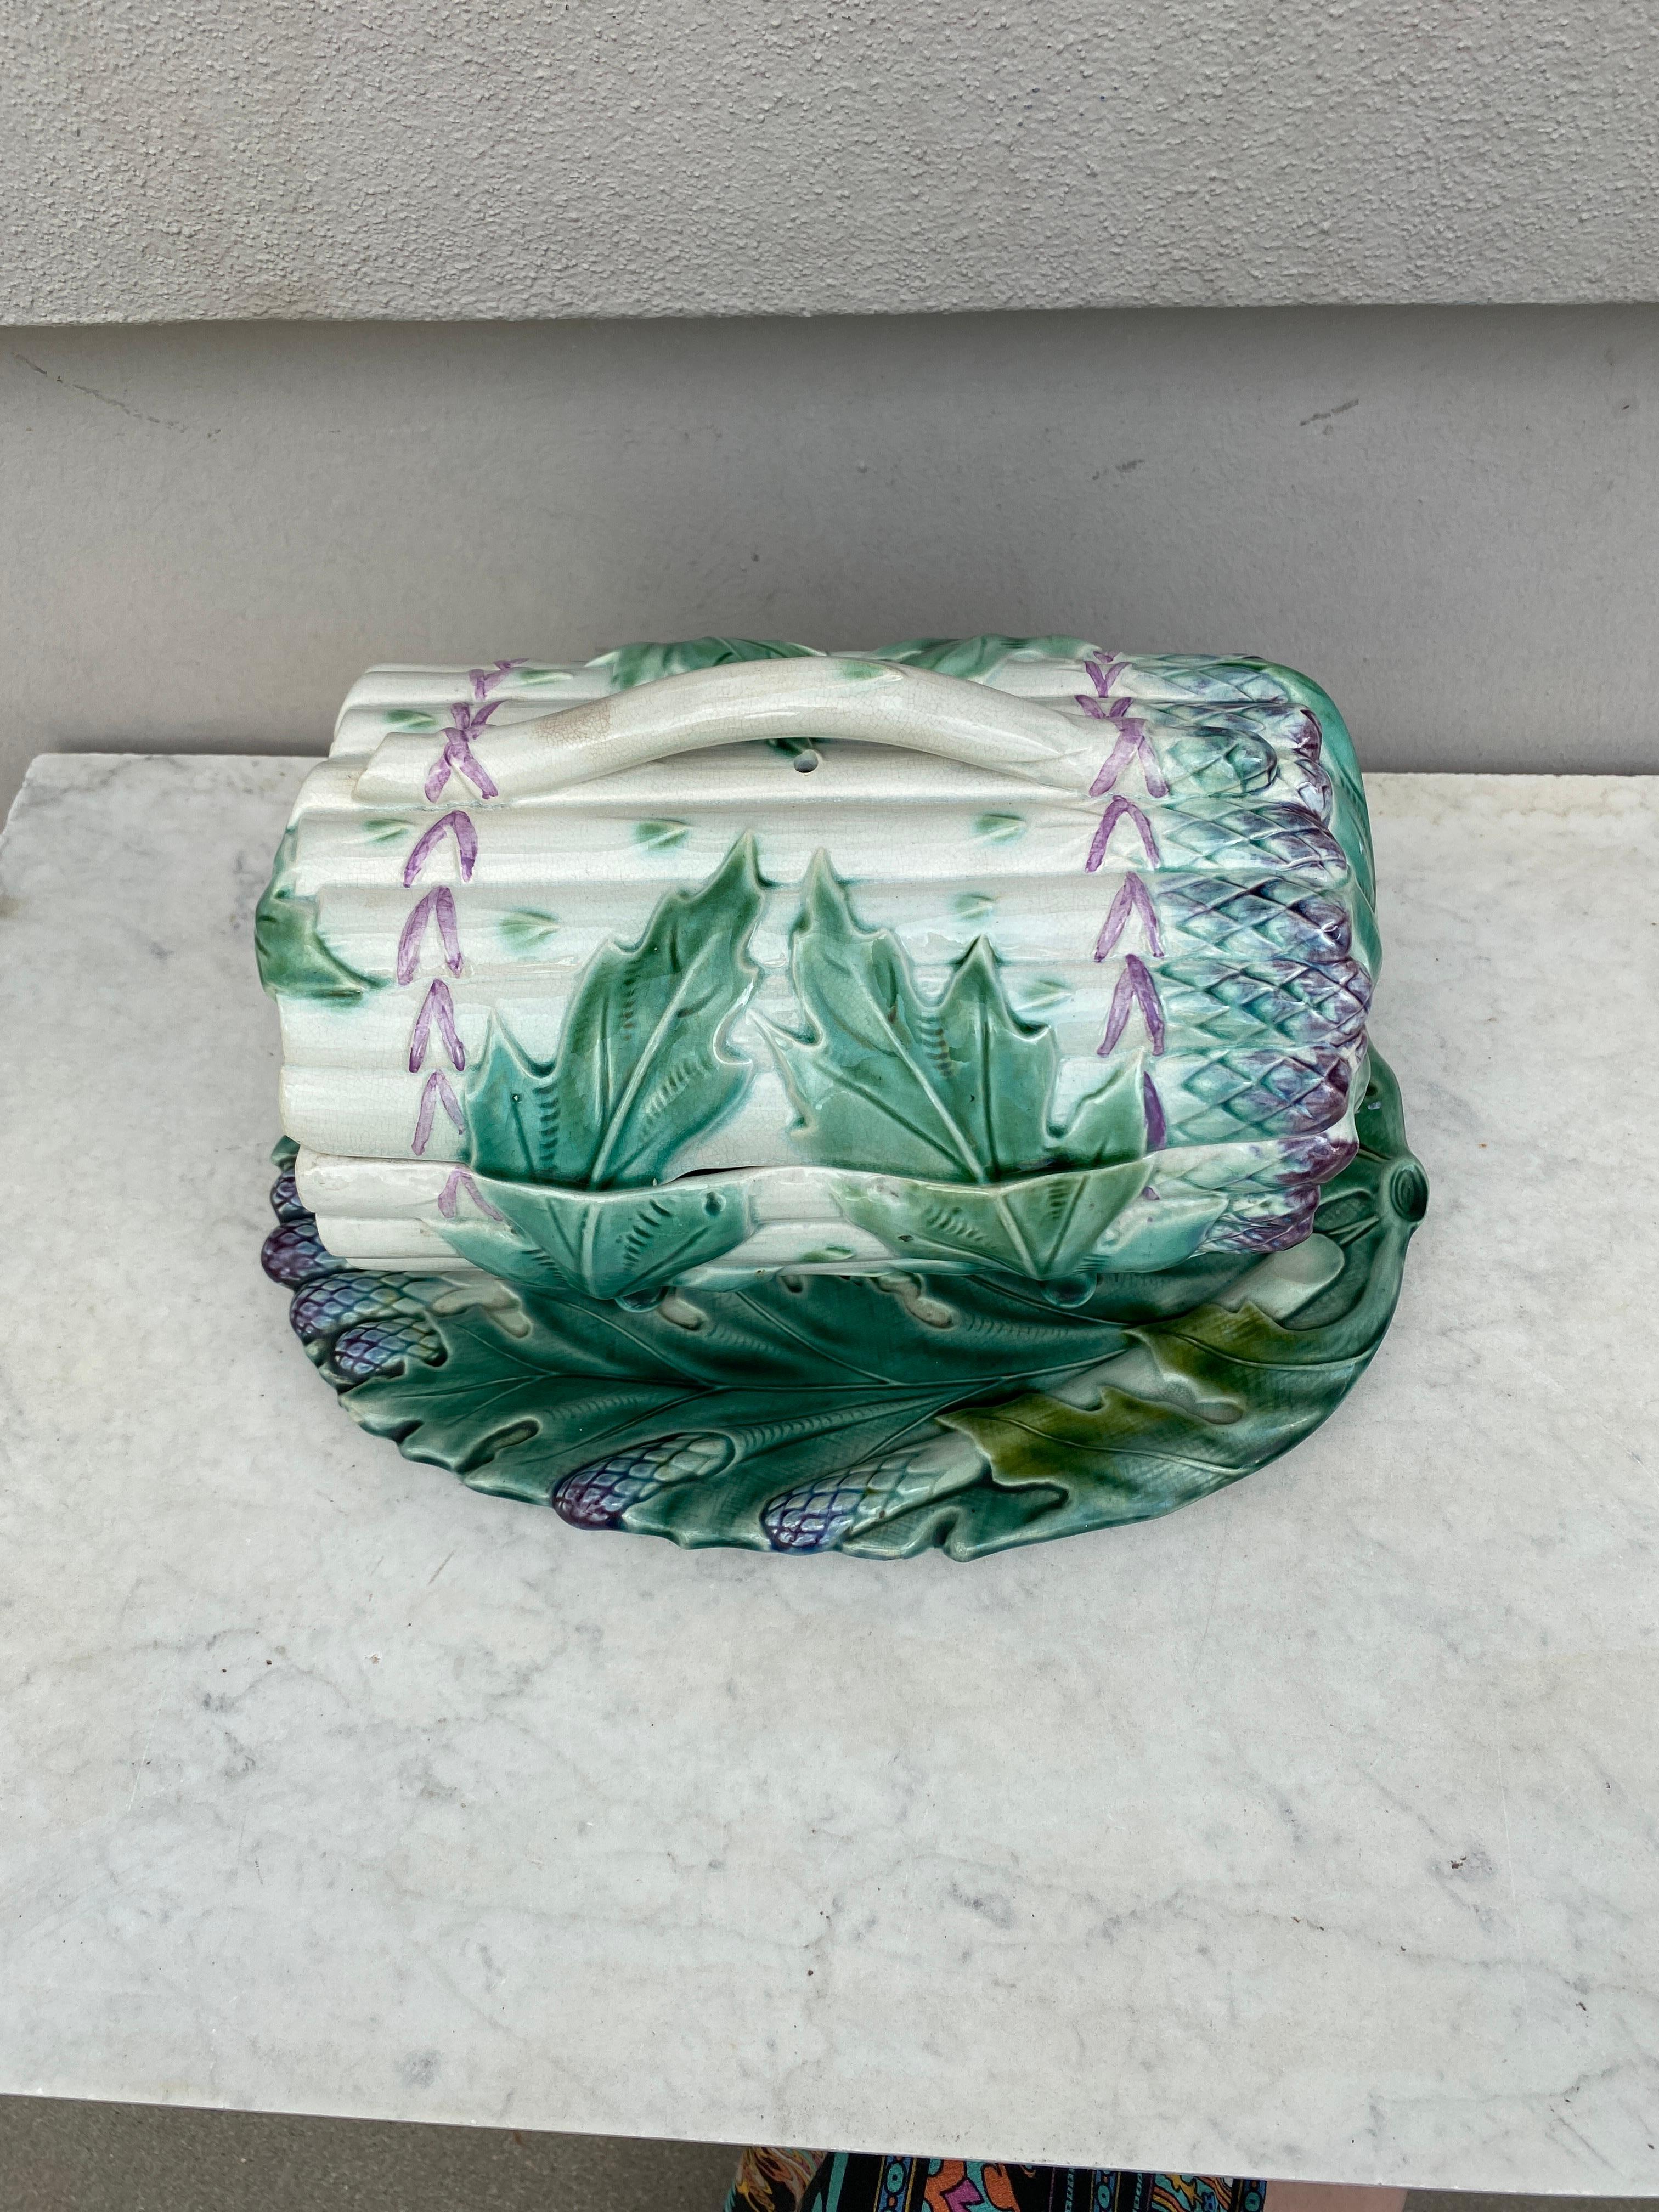 This French Majolica footed tureen is a bunch of asparagus surrounded by large artichoke leaves with his original under platter is one of the rare example of asparagus tureens made at the end of 19th century.
At this period, almost all the French